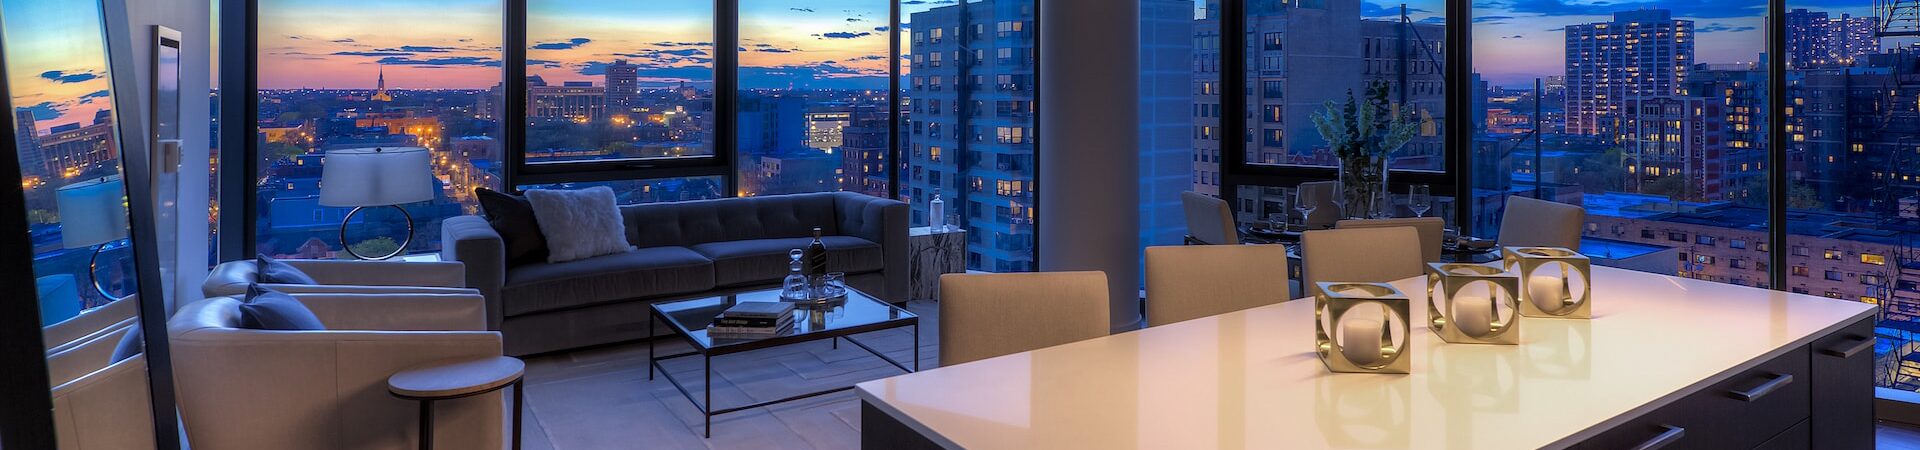 Sunset city view of Chicago through the kitchen and living room of a unit with floor to ceiling windows